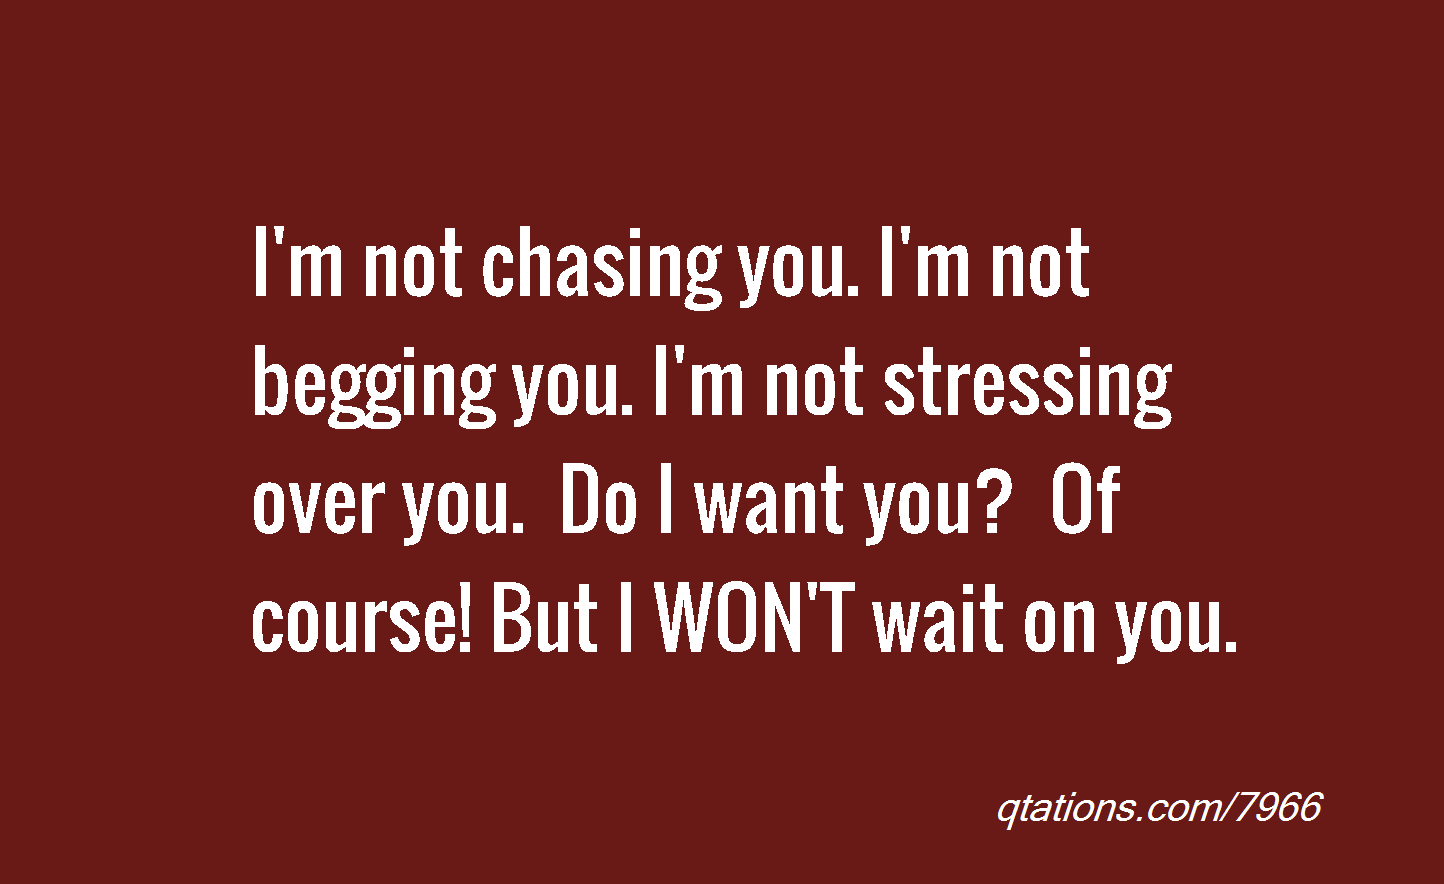 Im Done Chasing After You Quotes.